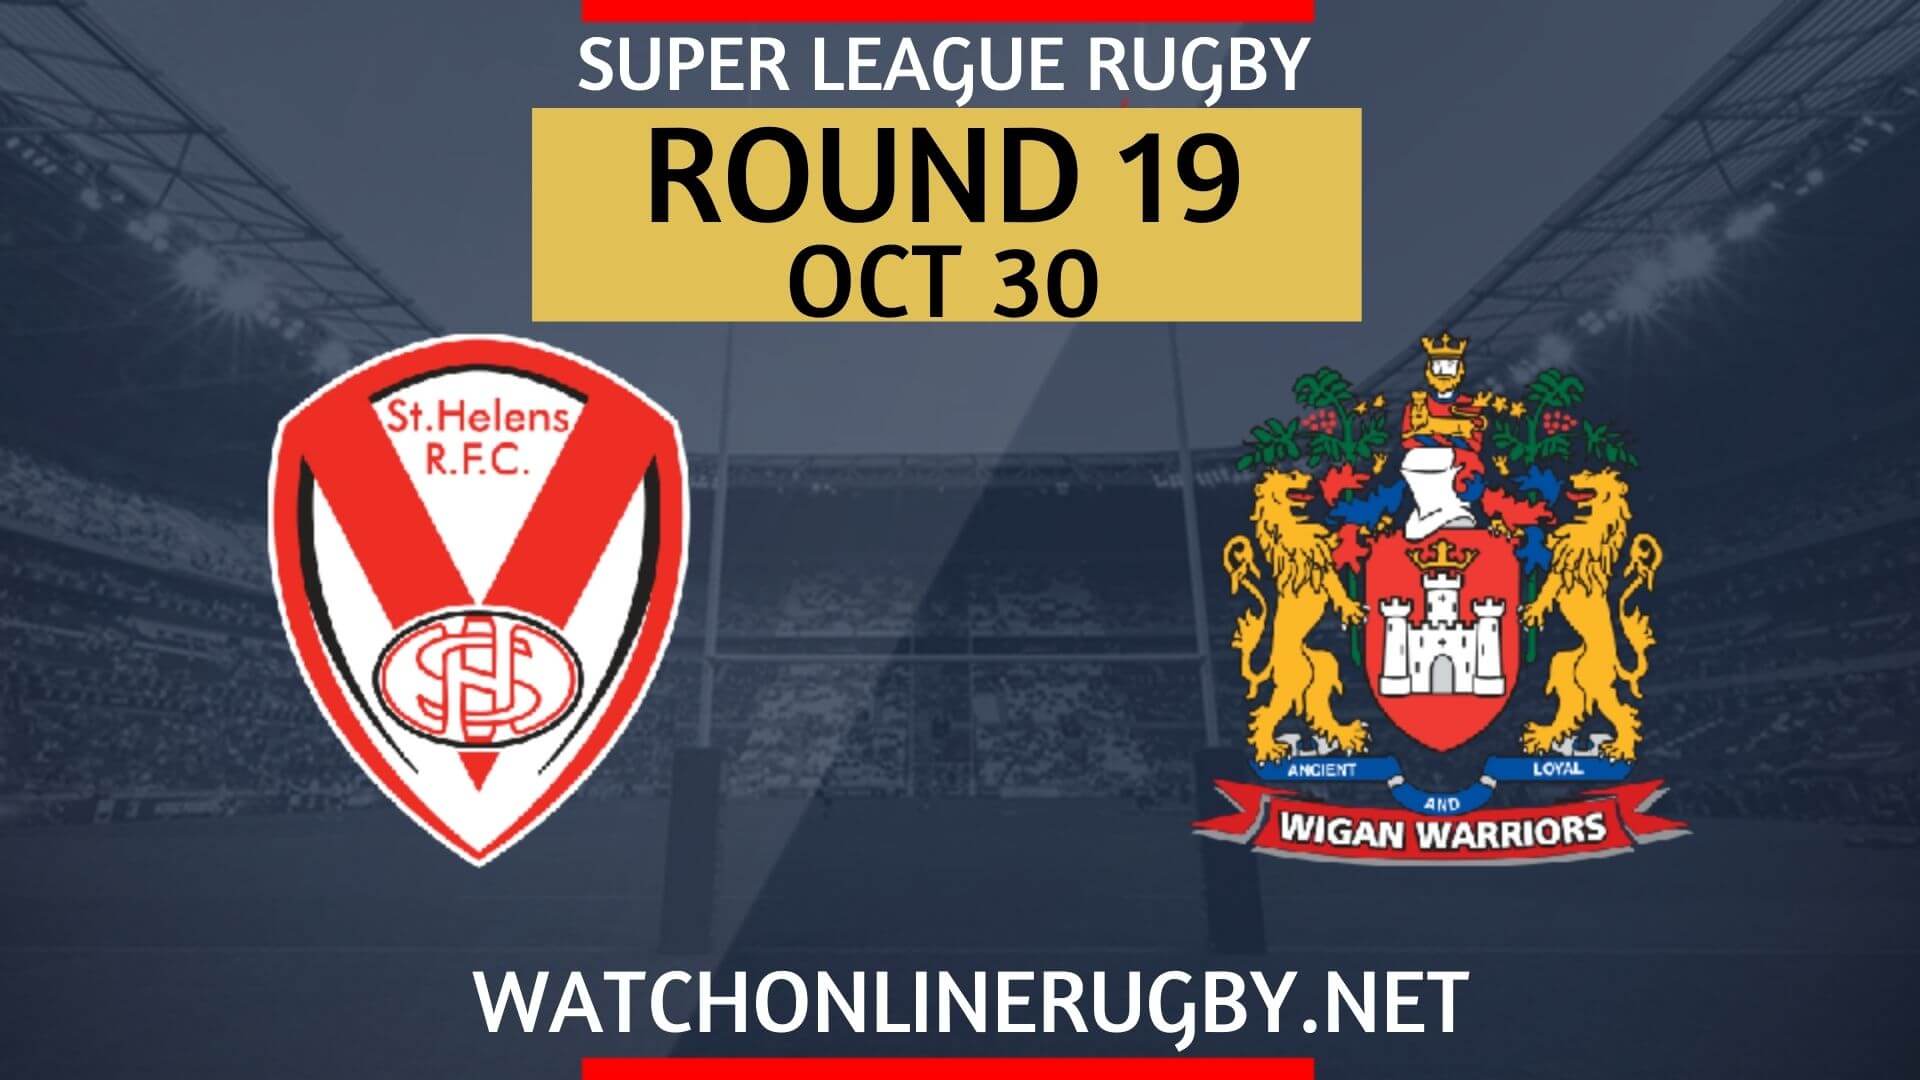 St Helens Vs Wigan Warriors Super League Rugby 2020 RD 19